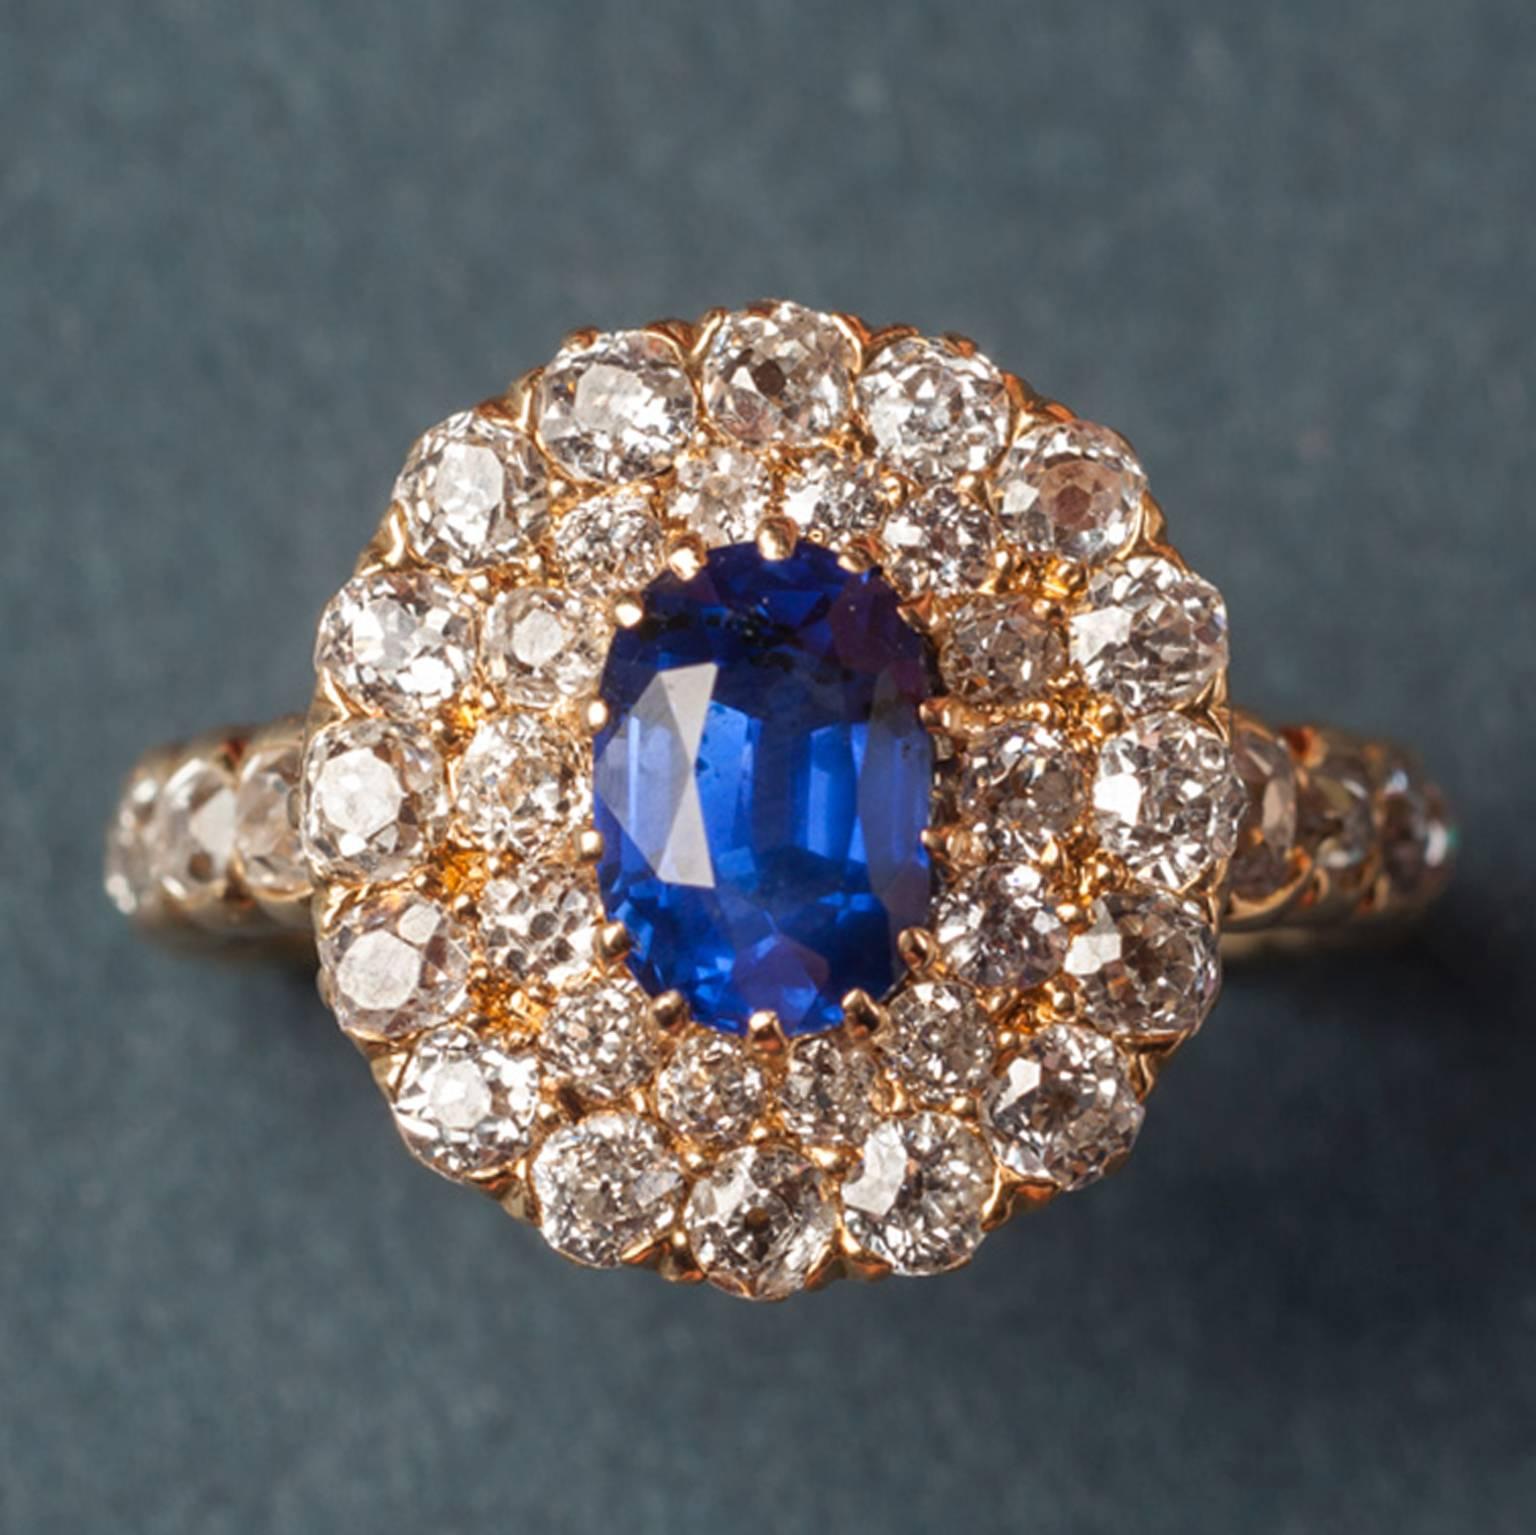 An oval yellow gold Edwardian ring set with a natural blue sapphire (app. 1.5 carats) surrounded by two rows of old cut diamonds, the shank is also set with old cut diamonds (2.5 carats in total), USA, circa 1910.

weight: 5.4 grams
ring size: